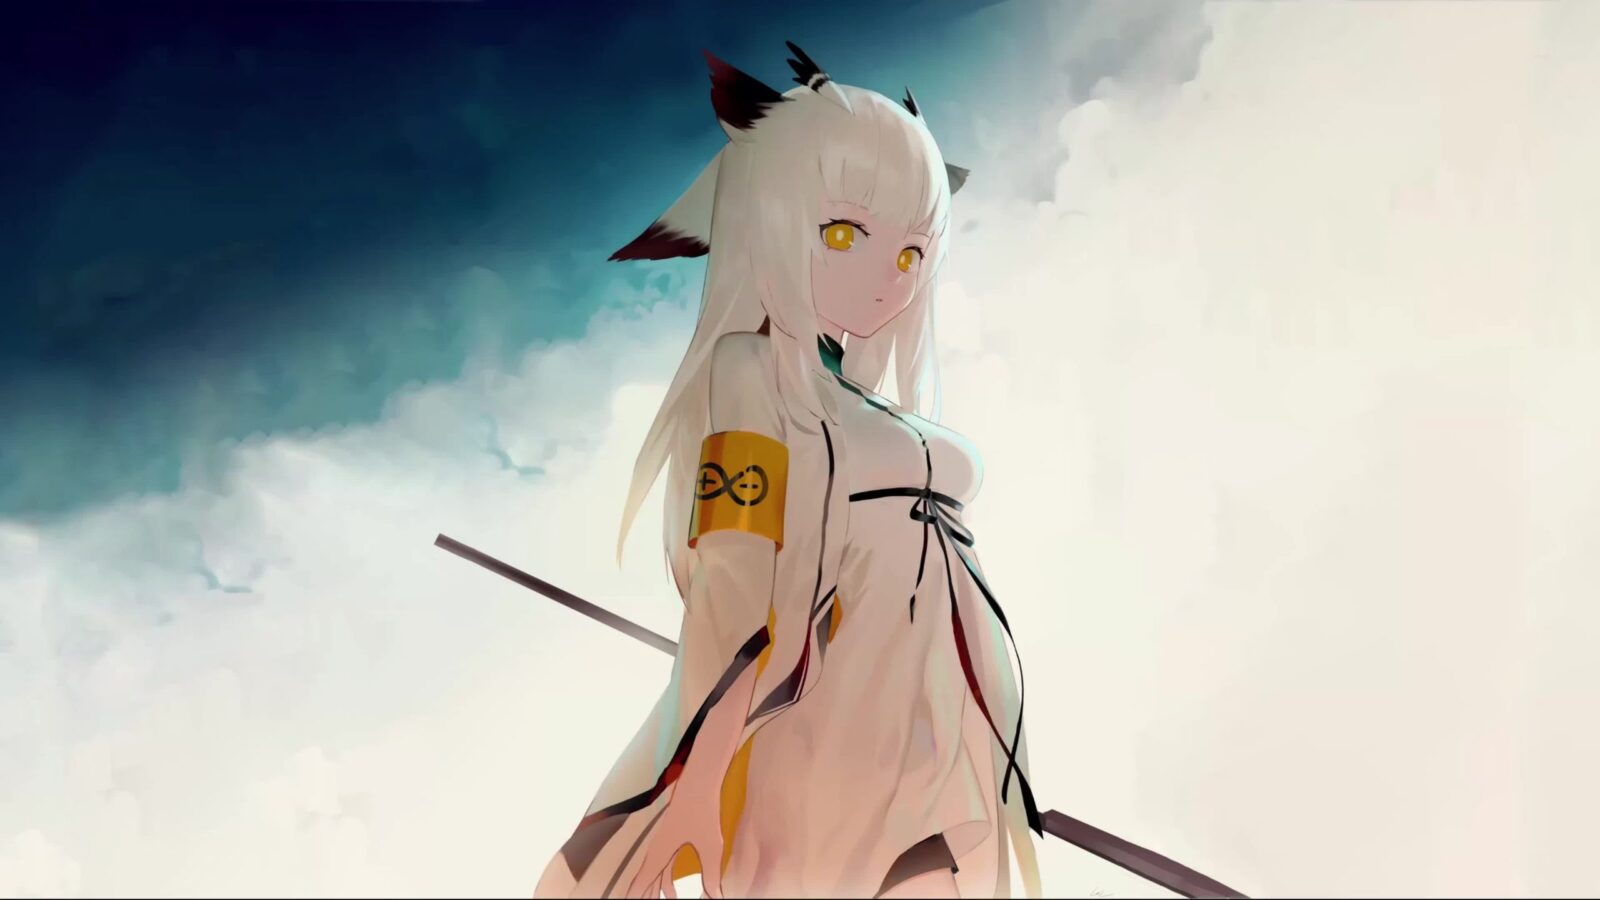 LiveWallpapers4Free.com | Arknights Game Anime Girl - Free Live Wallpaper